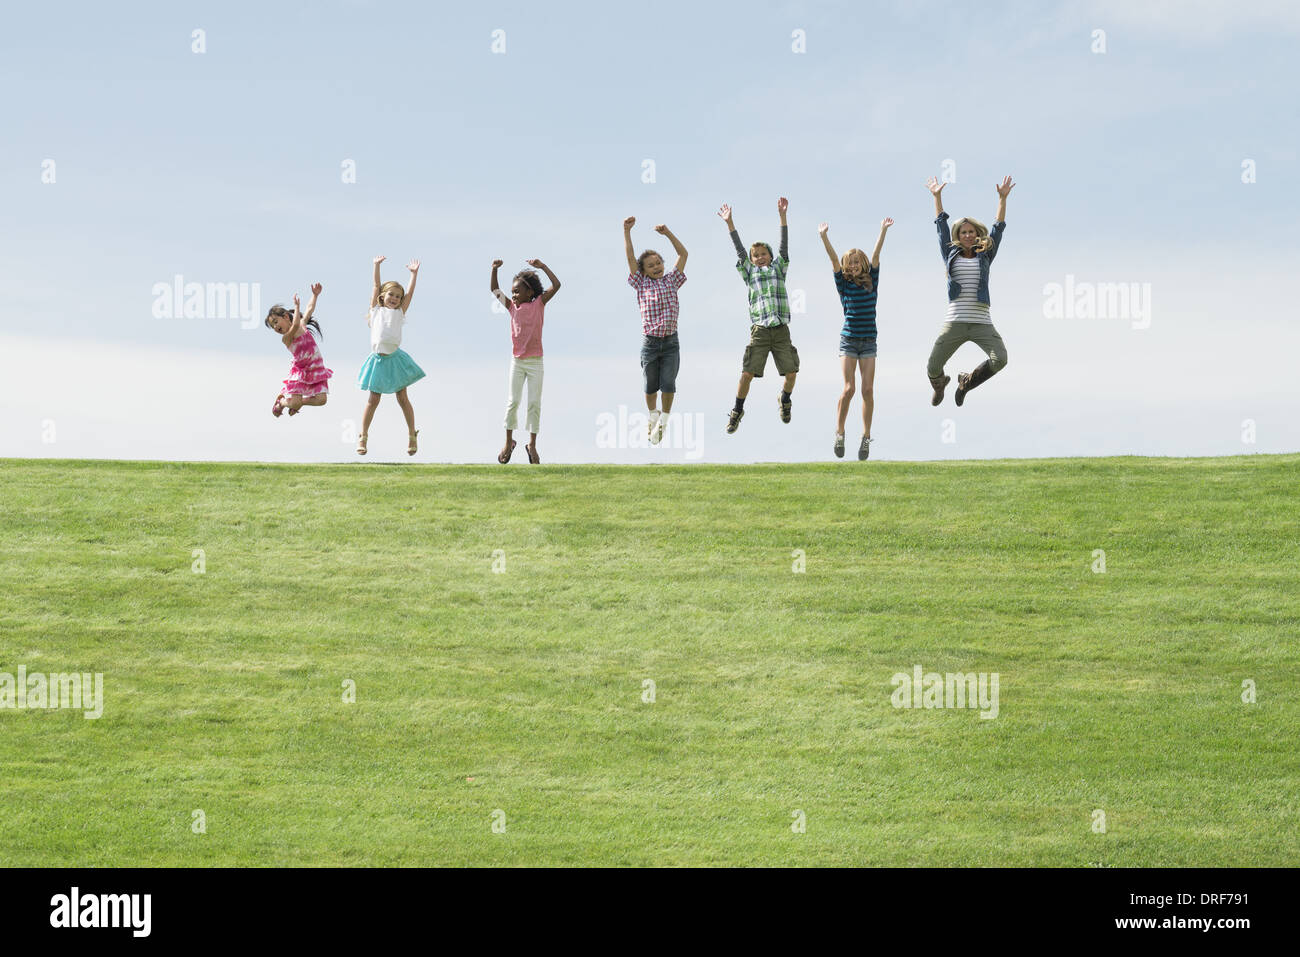 Utah USA group of children on top of hill in row leaping Stock Photo